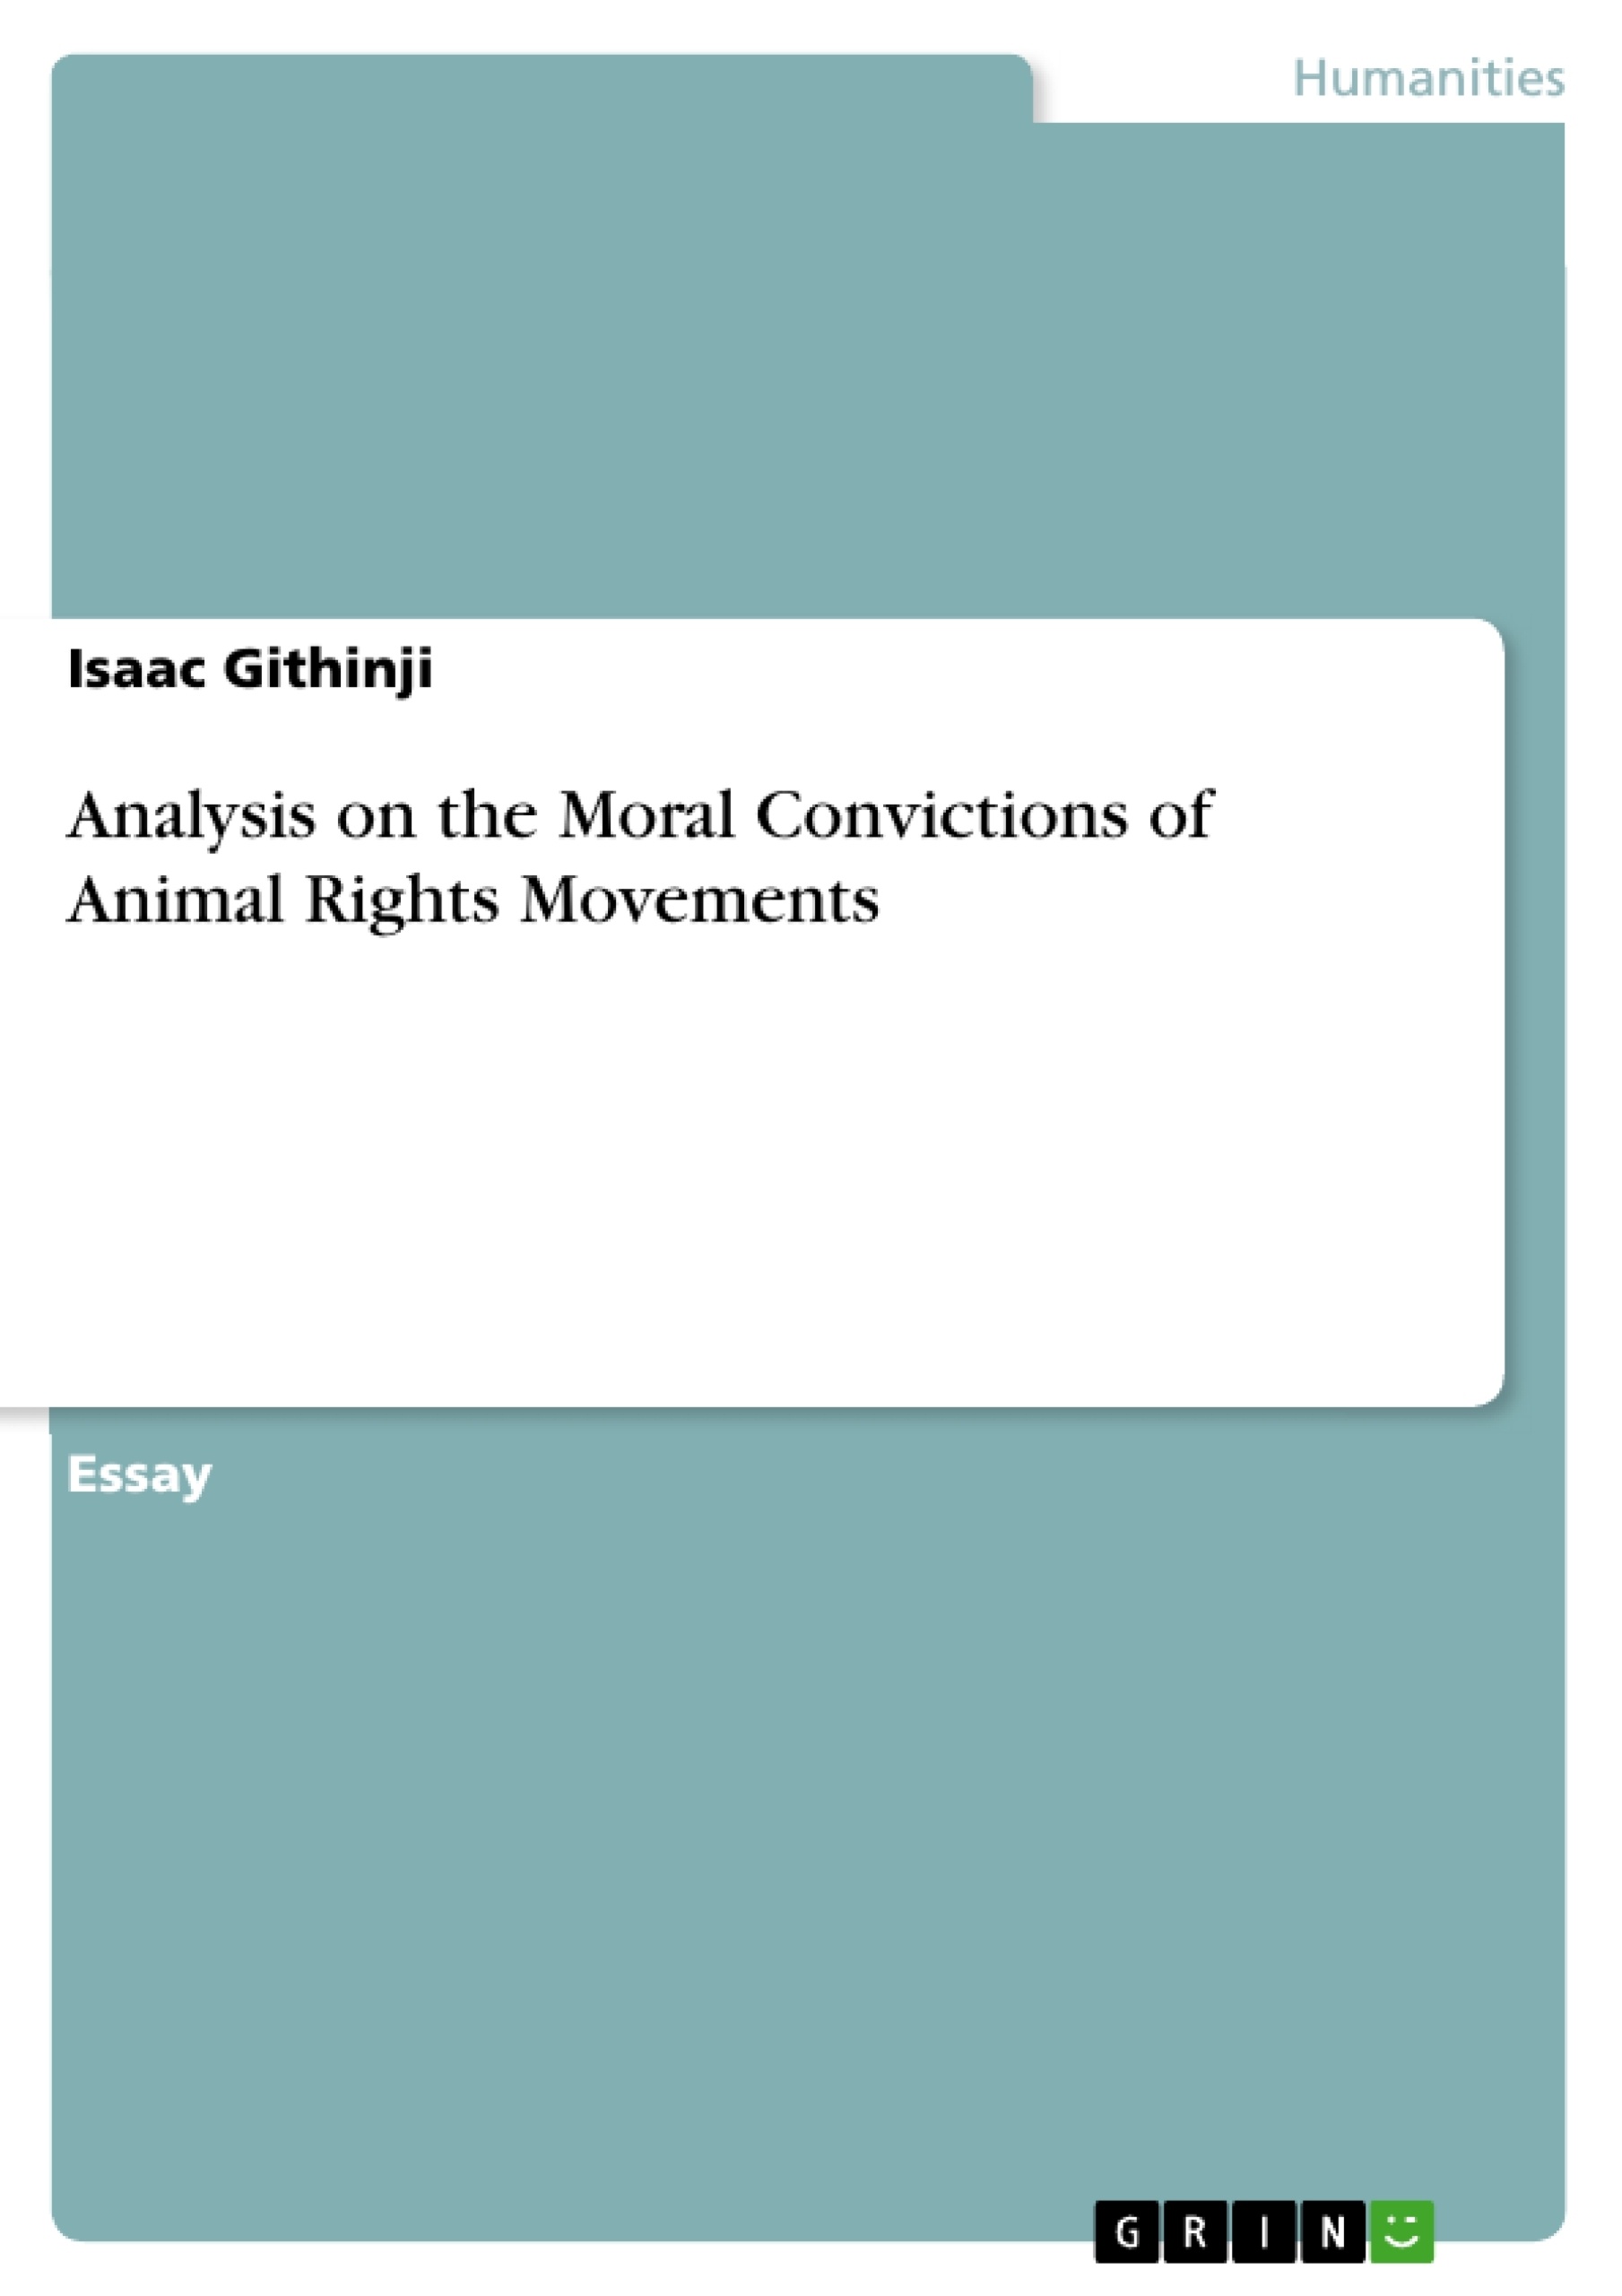 Title: Analysis on the Moral Convictions of Animal Rights Movements